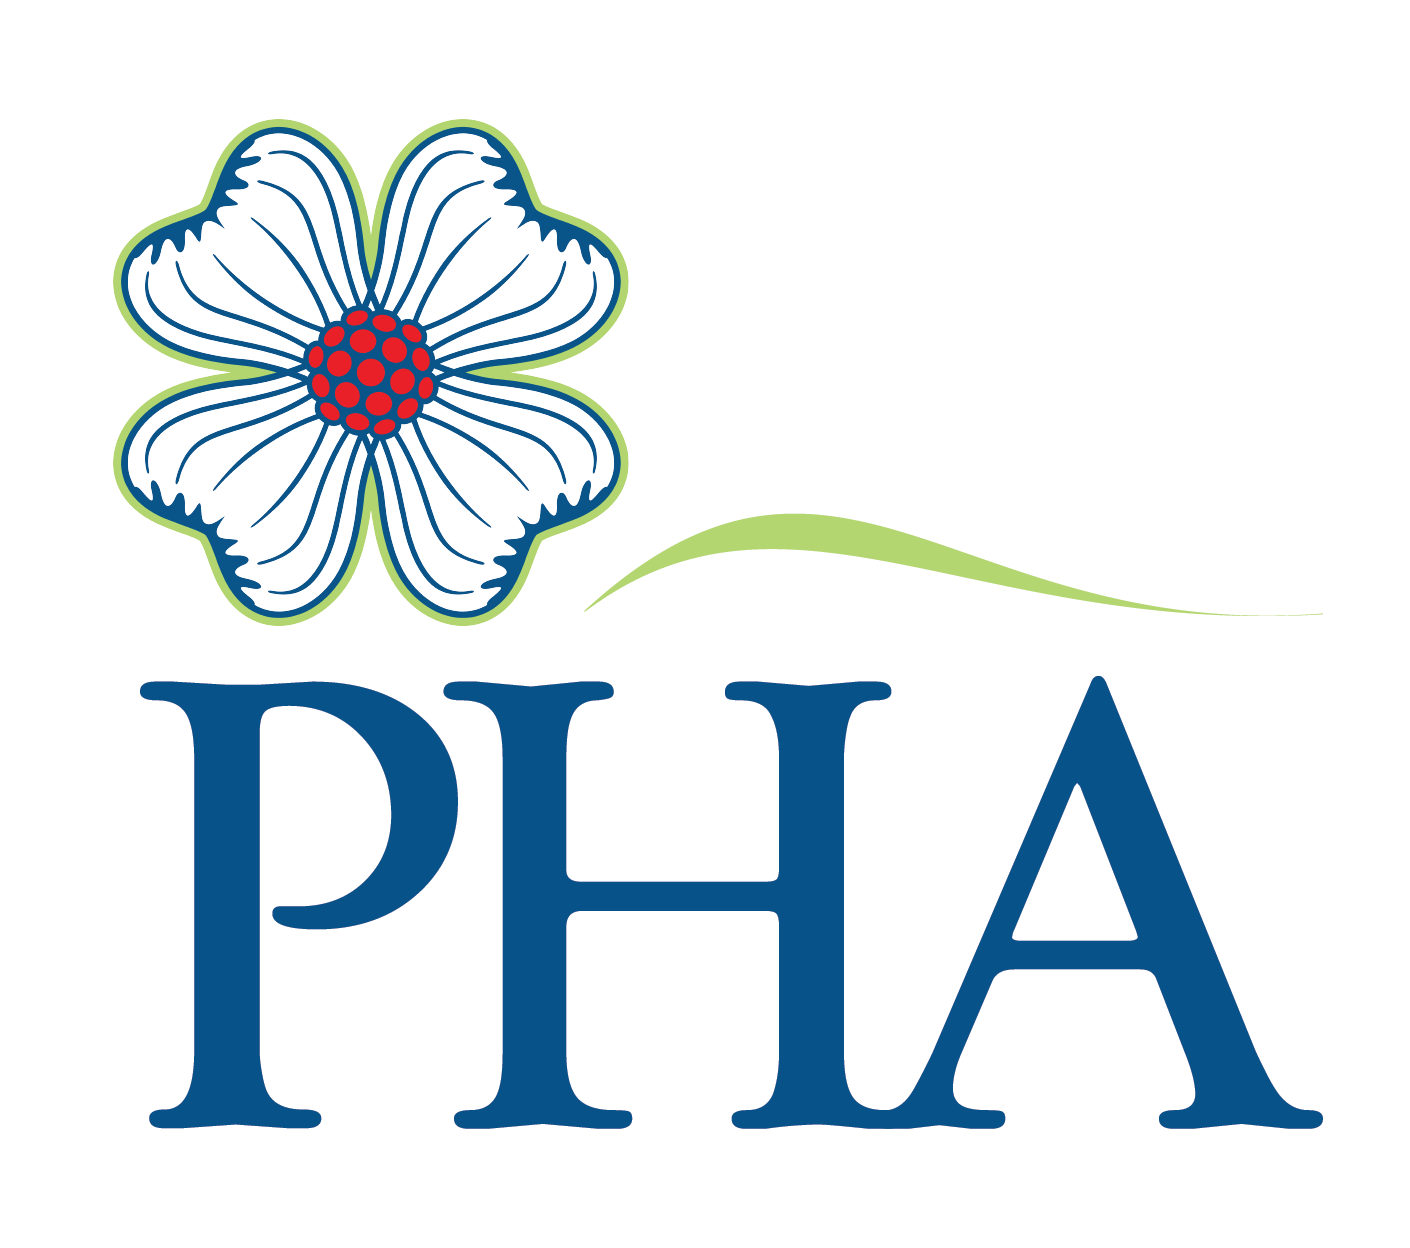 A white square with the Blue letters "PHA" under a blue, green and red dogwood bloom and small lime green swoosh that serves as a logo for the Paducah Hospitality Association in Paducah, KY.